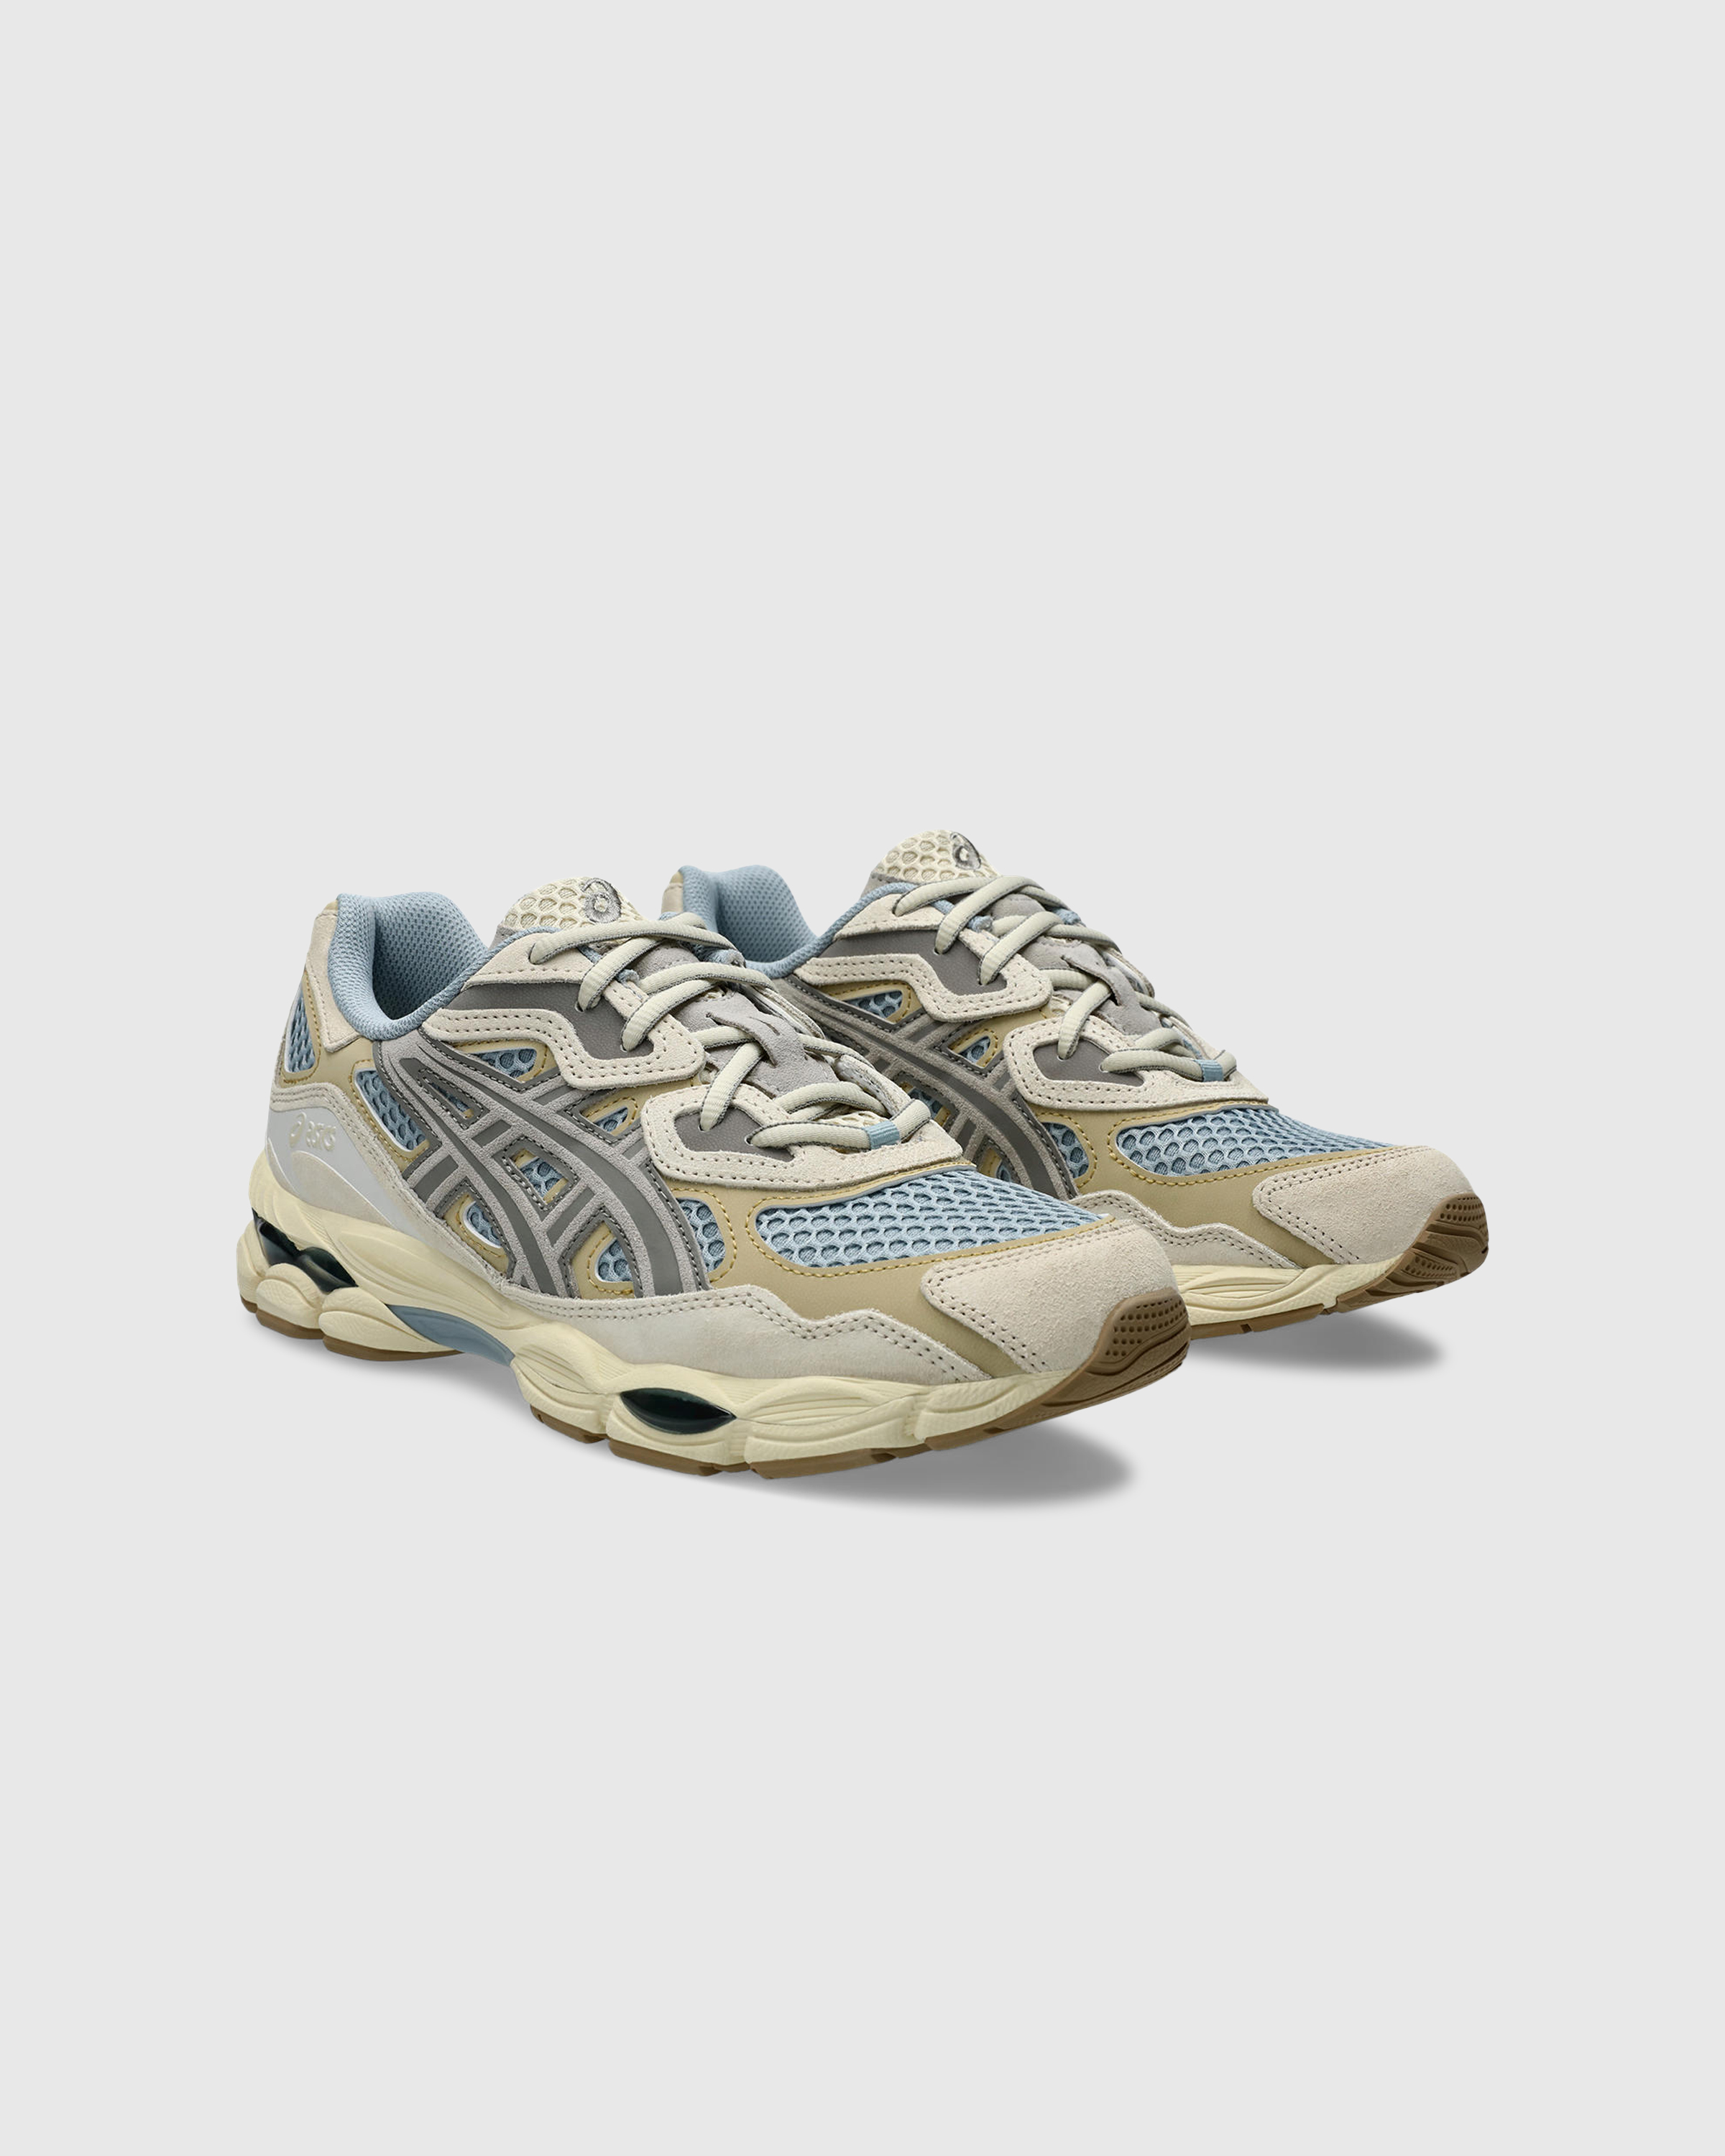 asics – GEL-NYC Dolphin Grey/Oyster Grey - Low Top Sneakers - Grey - Image 3